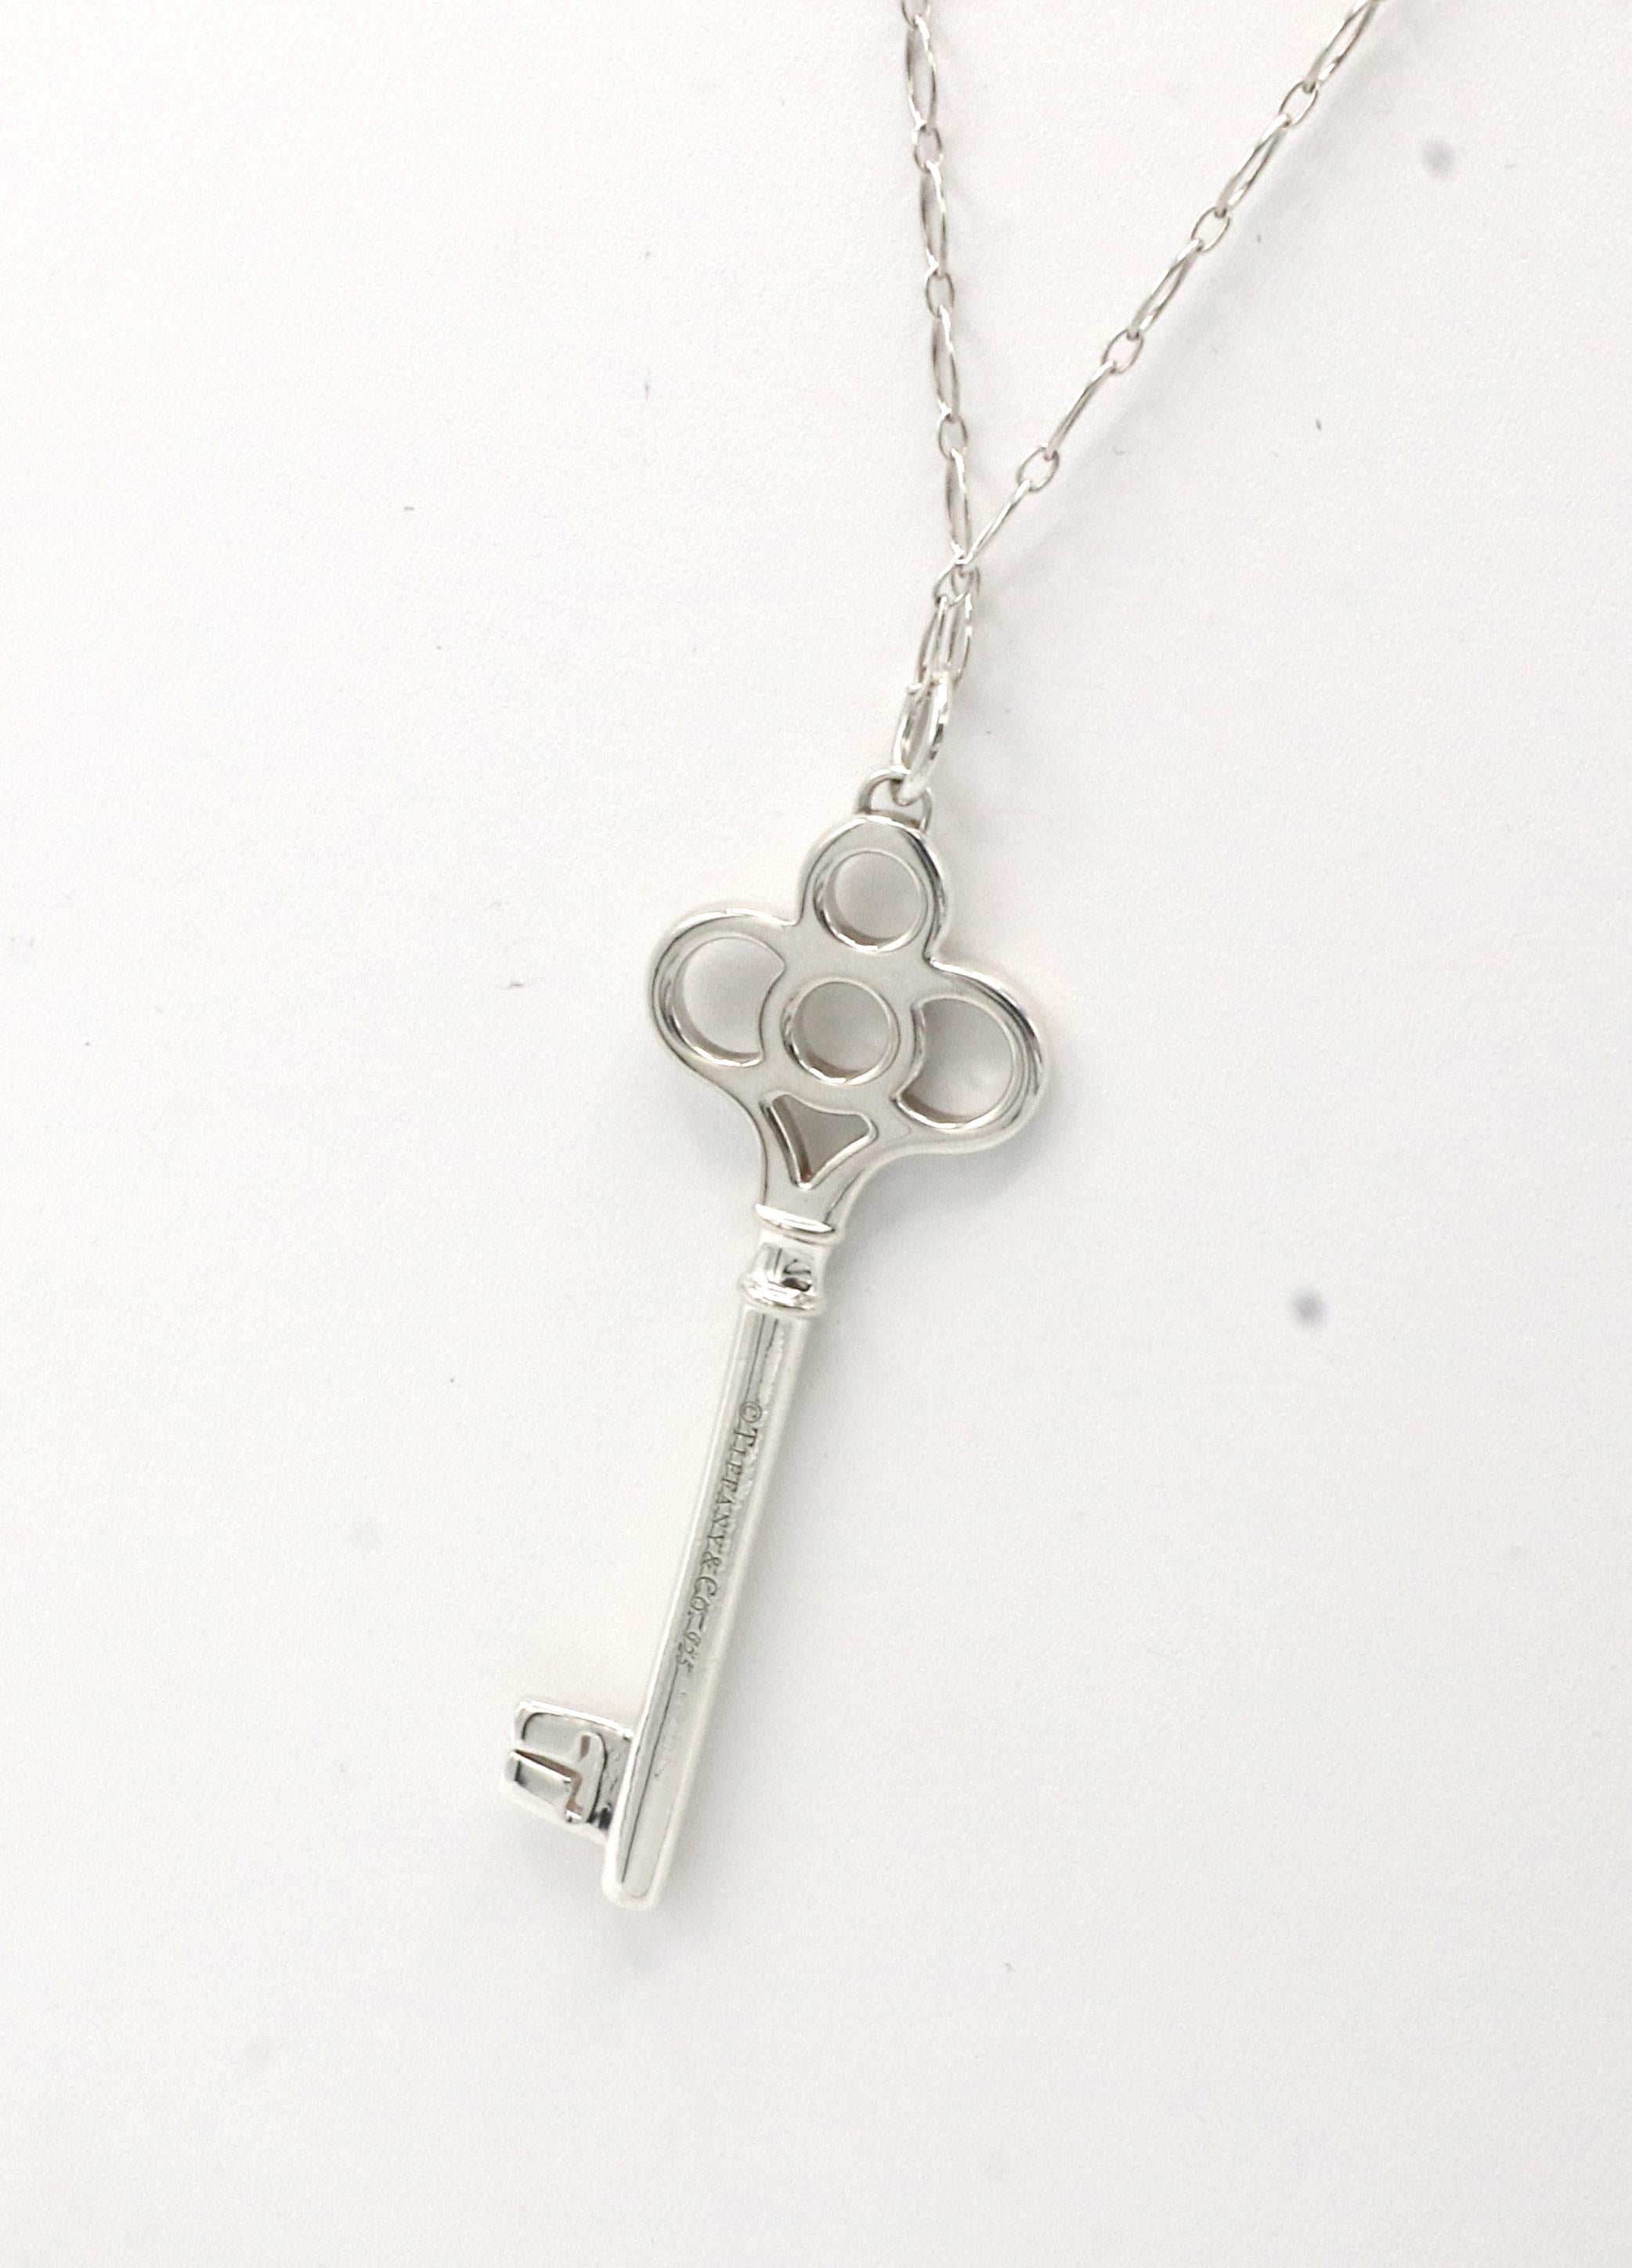 Tiffany & Co. Sterling Silver Crown Key Pendant Long Chain Necklace
Metal: Sterling silver 925
Weight: 11.6 grams
Key: 62 x 20mm
Chain length: 32 inches
